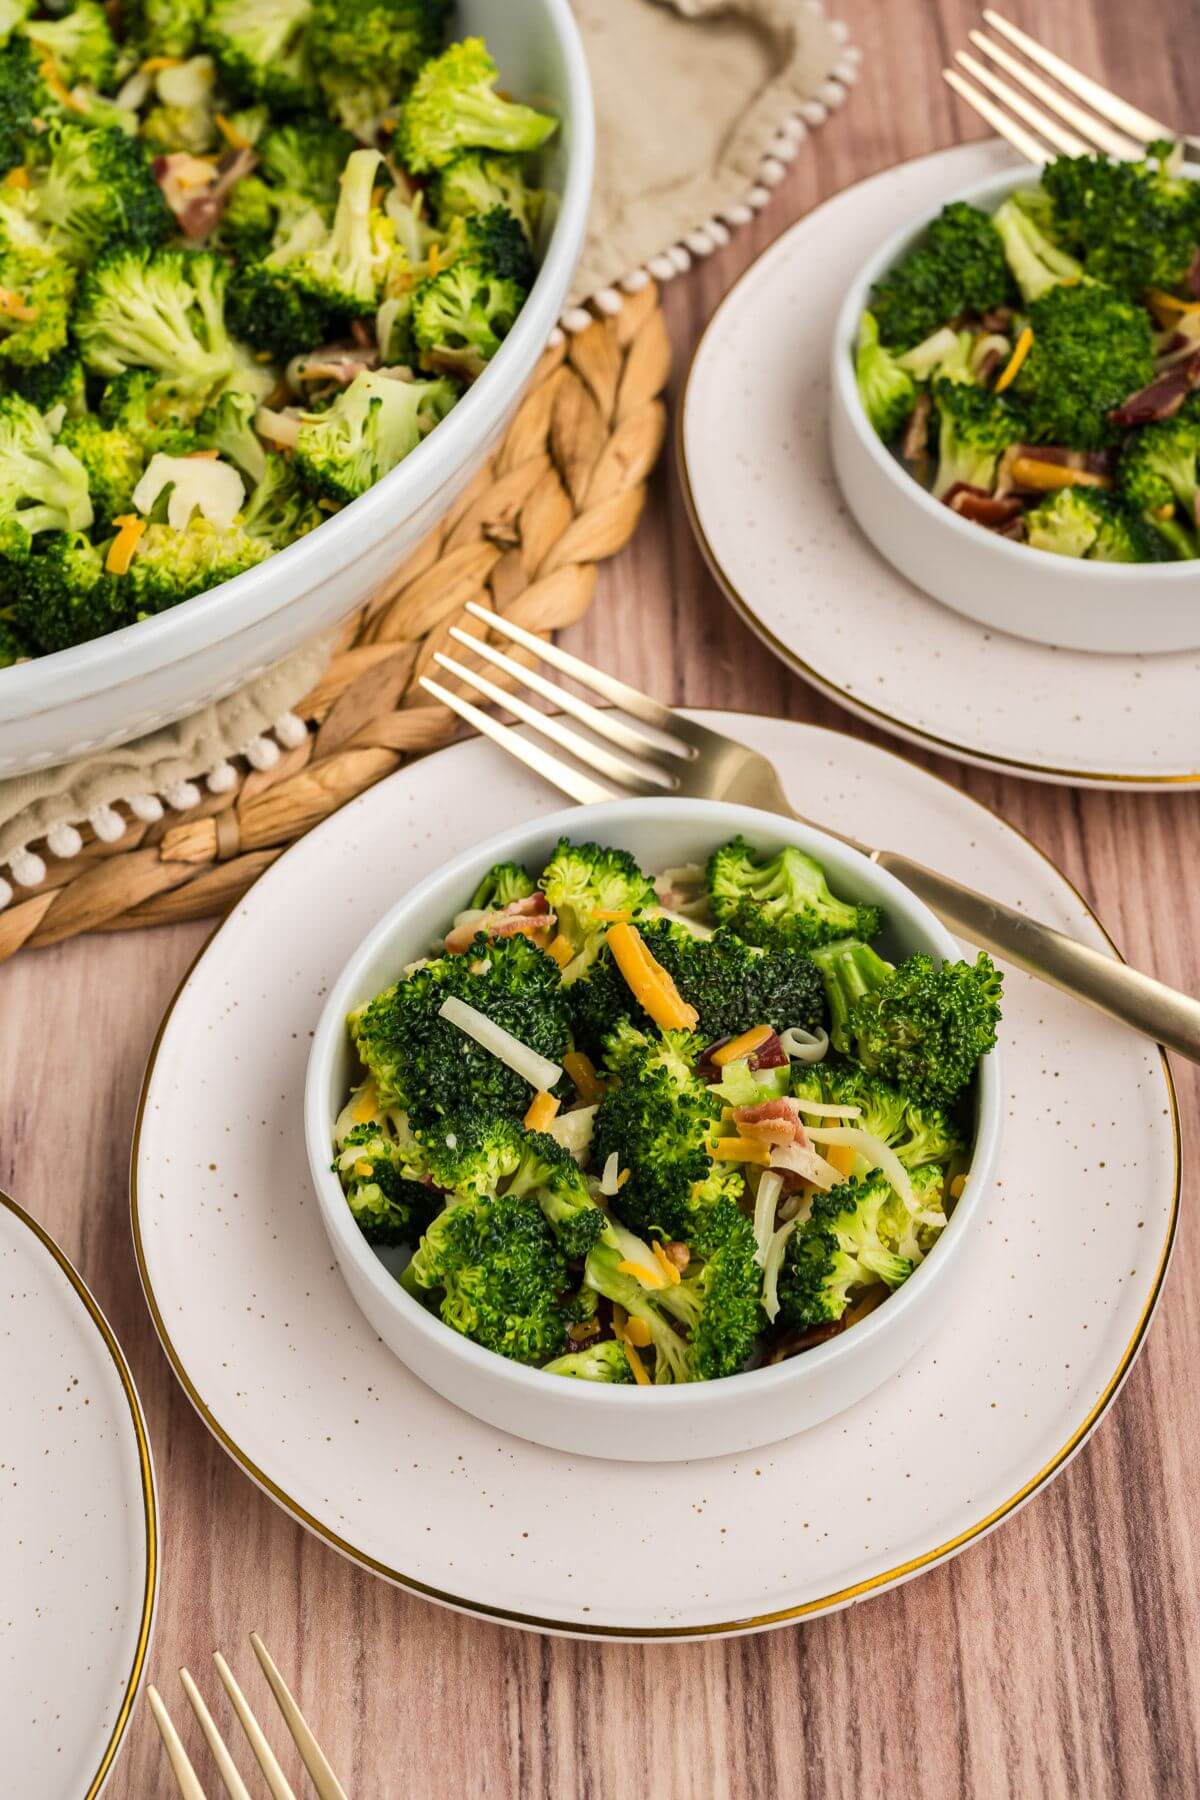 Bright green broccoli is mixed with bacon and cheese and served in small bowls on saucers.